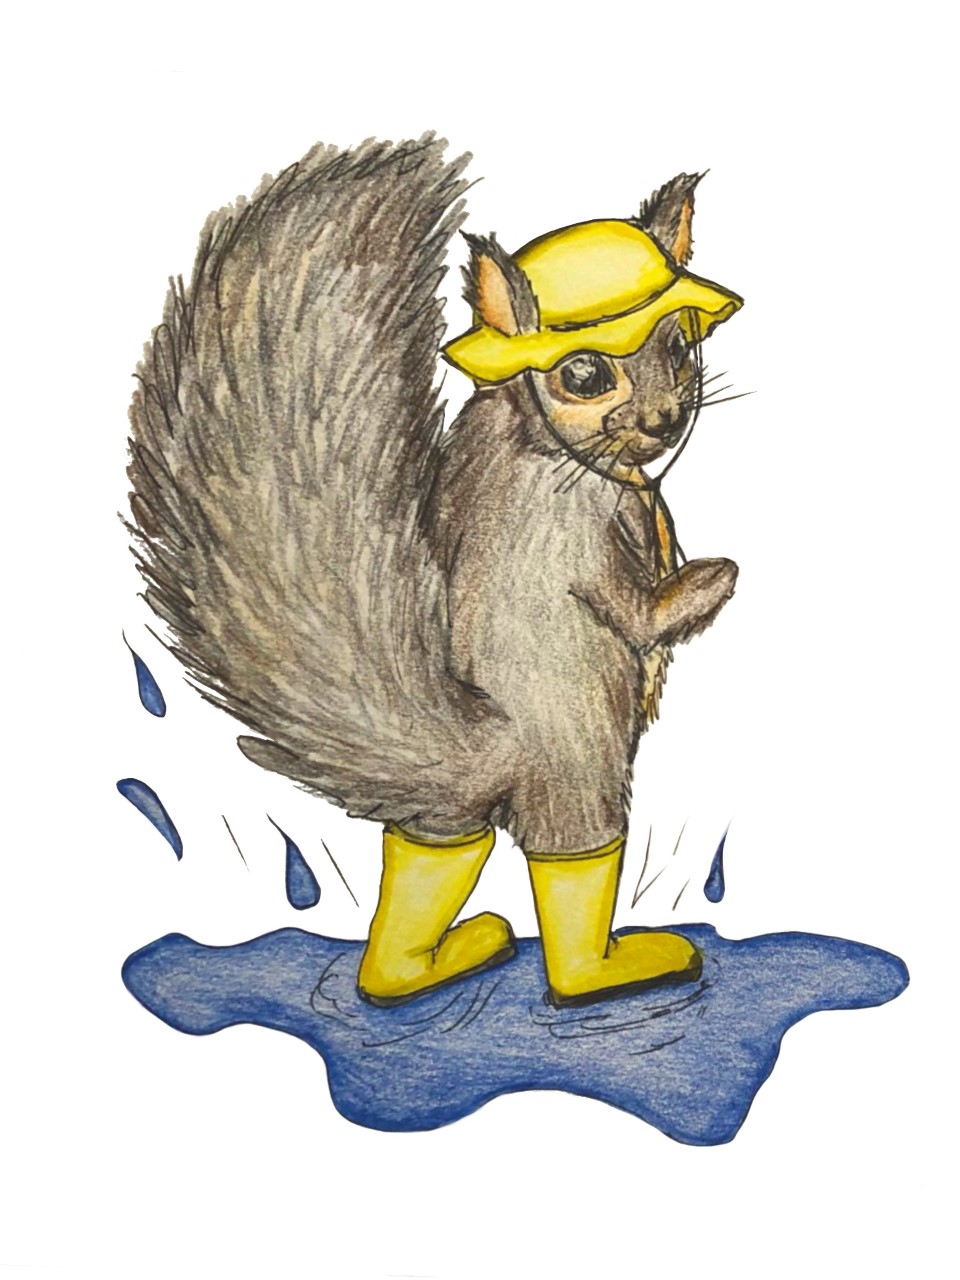 Illustration of a squirrel wearing a yellow rain hat and rain boots